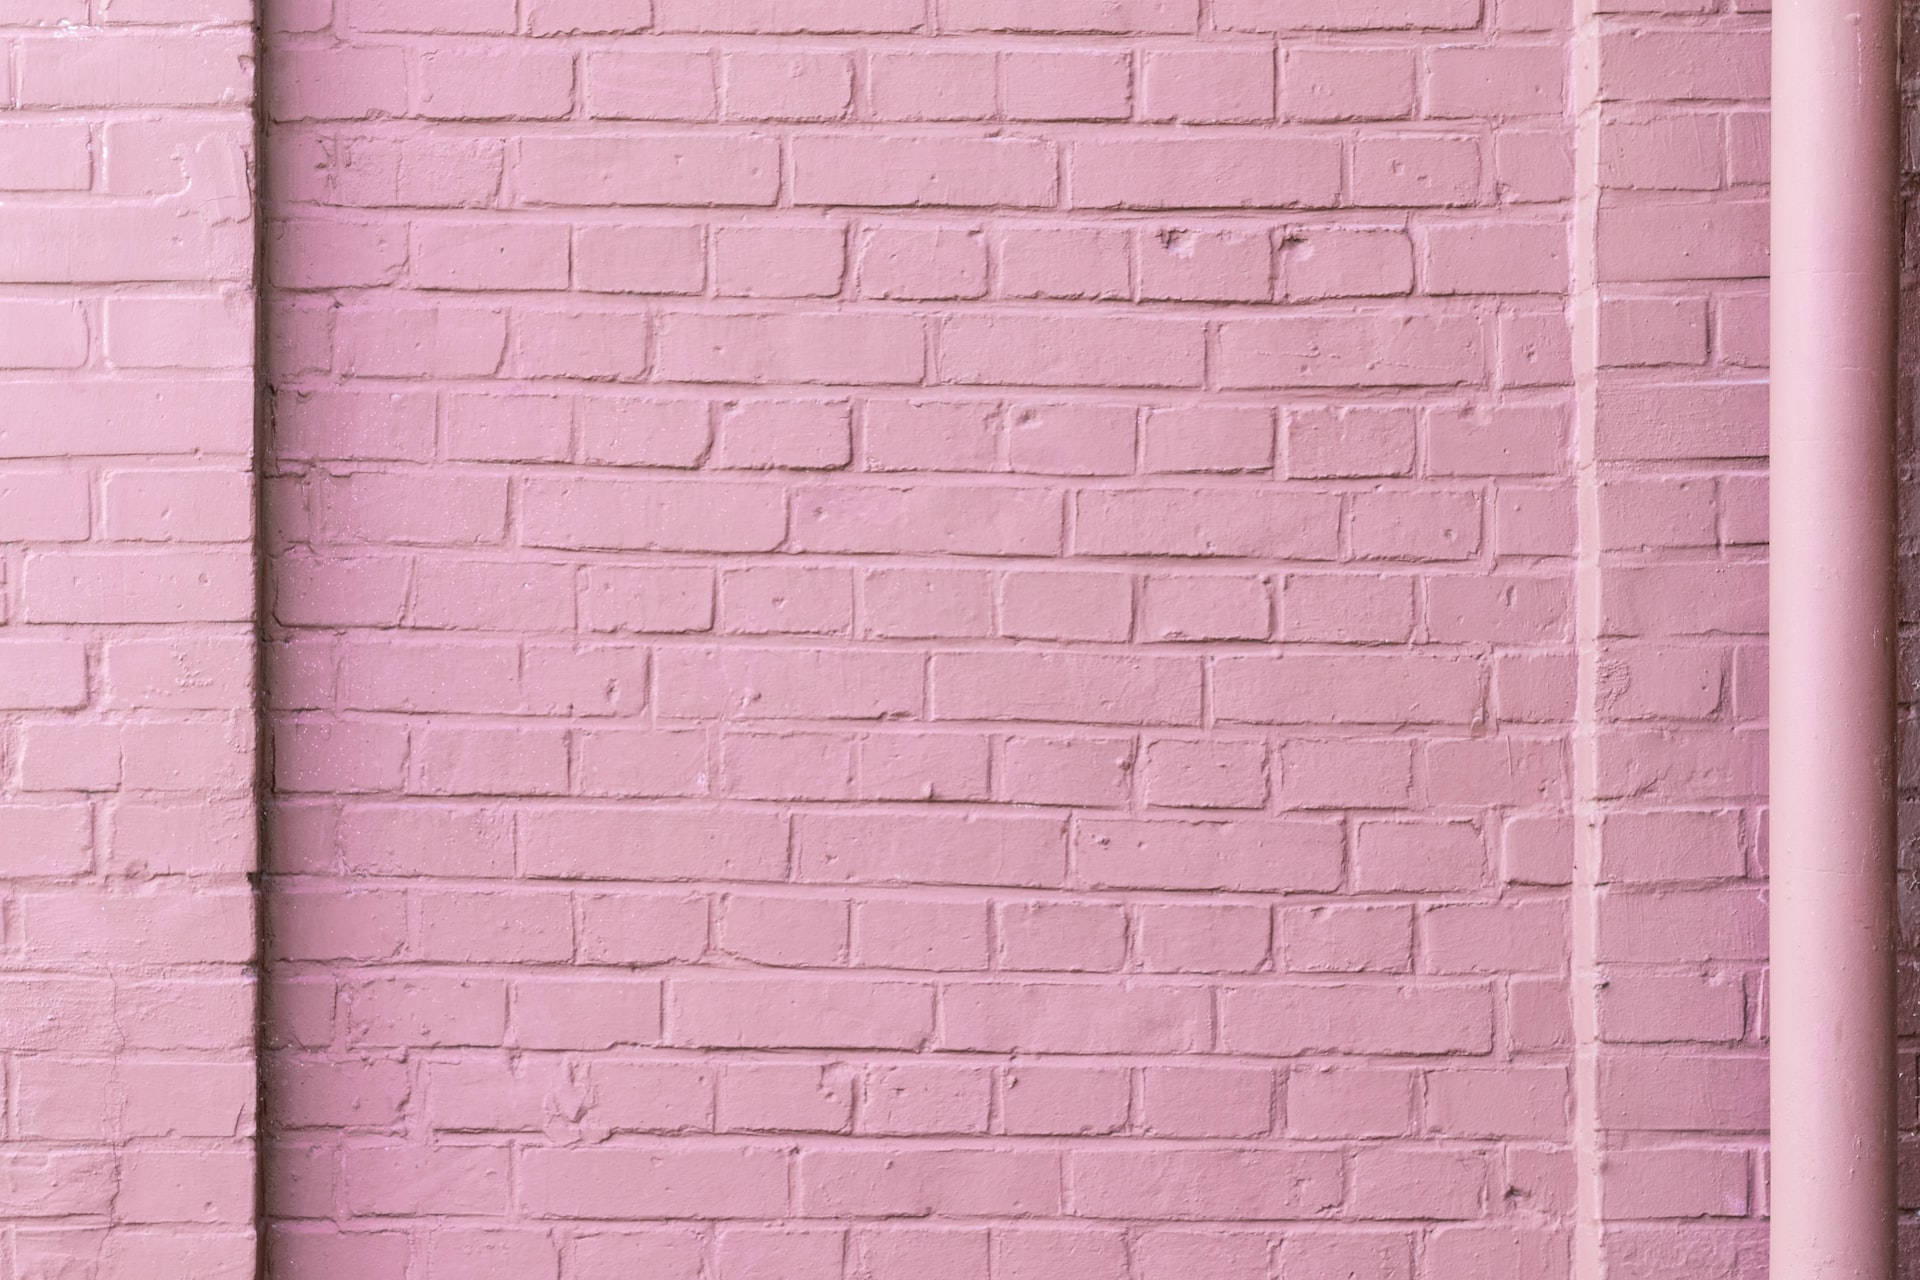 Free Brick Wall Wallpaper Downloads, [100+] Brick Wall Wallpapers for FREE  